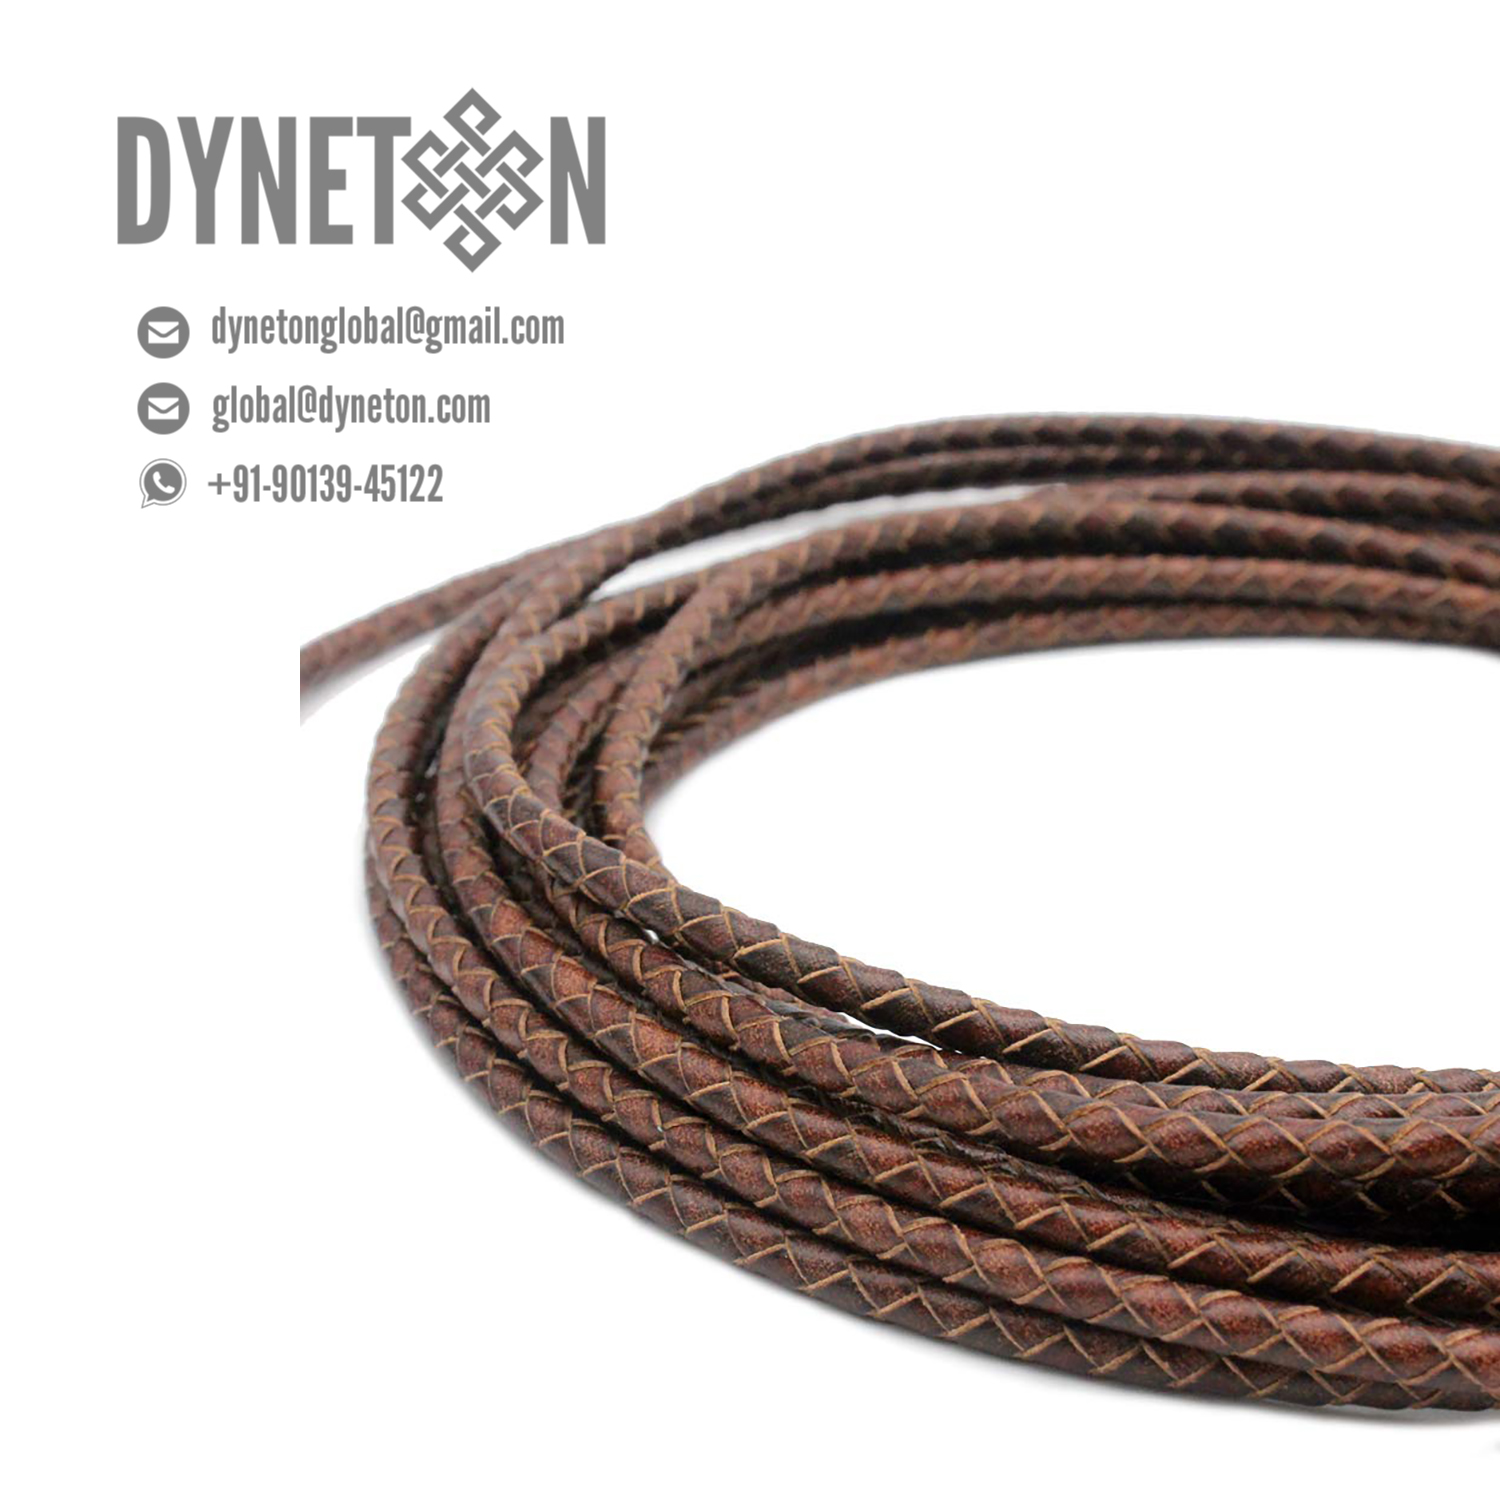 5mm Bolo Braided Leather Cord - DYNETON / Braided Leather Cords 5 mm